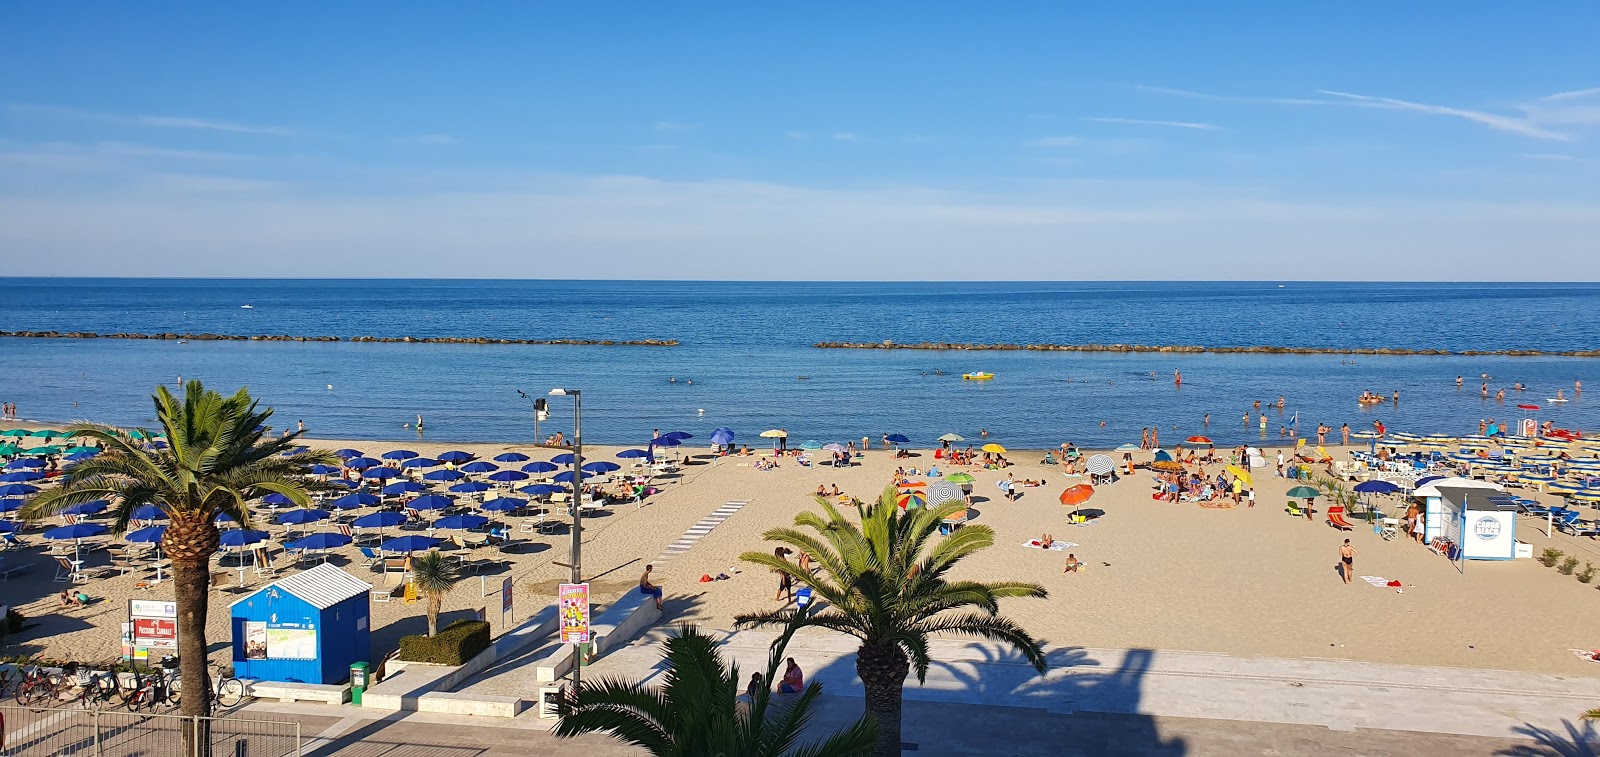 Photo of Grottammare beach - popular place among relax connoisseurs